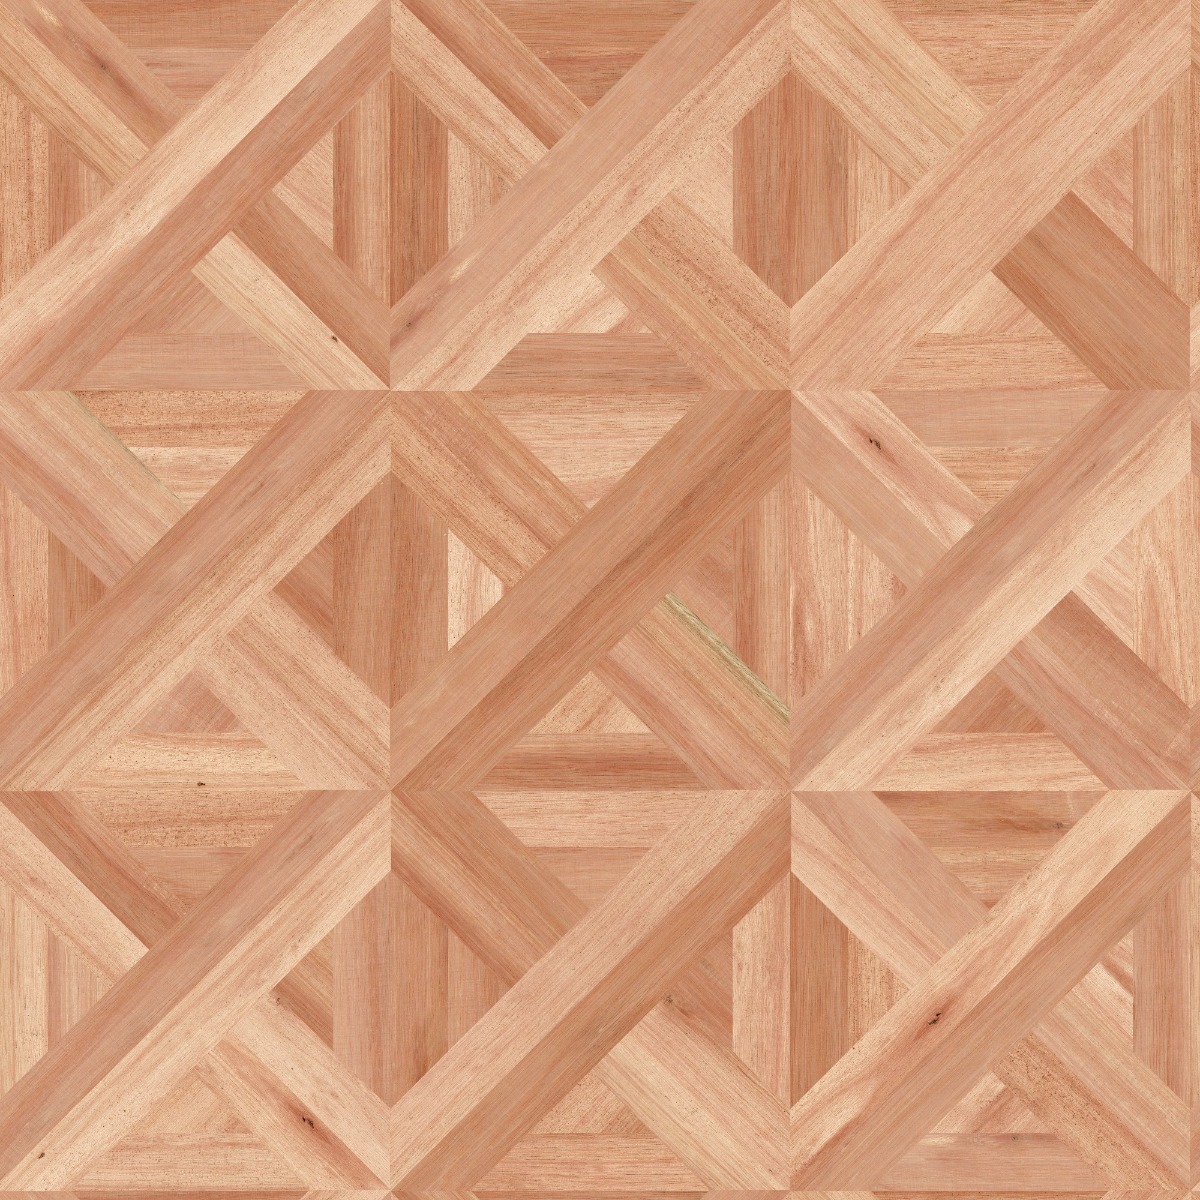 A seamless wood texture with eucalyptus boards arranged in a Versailles pattern